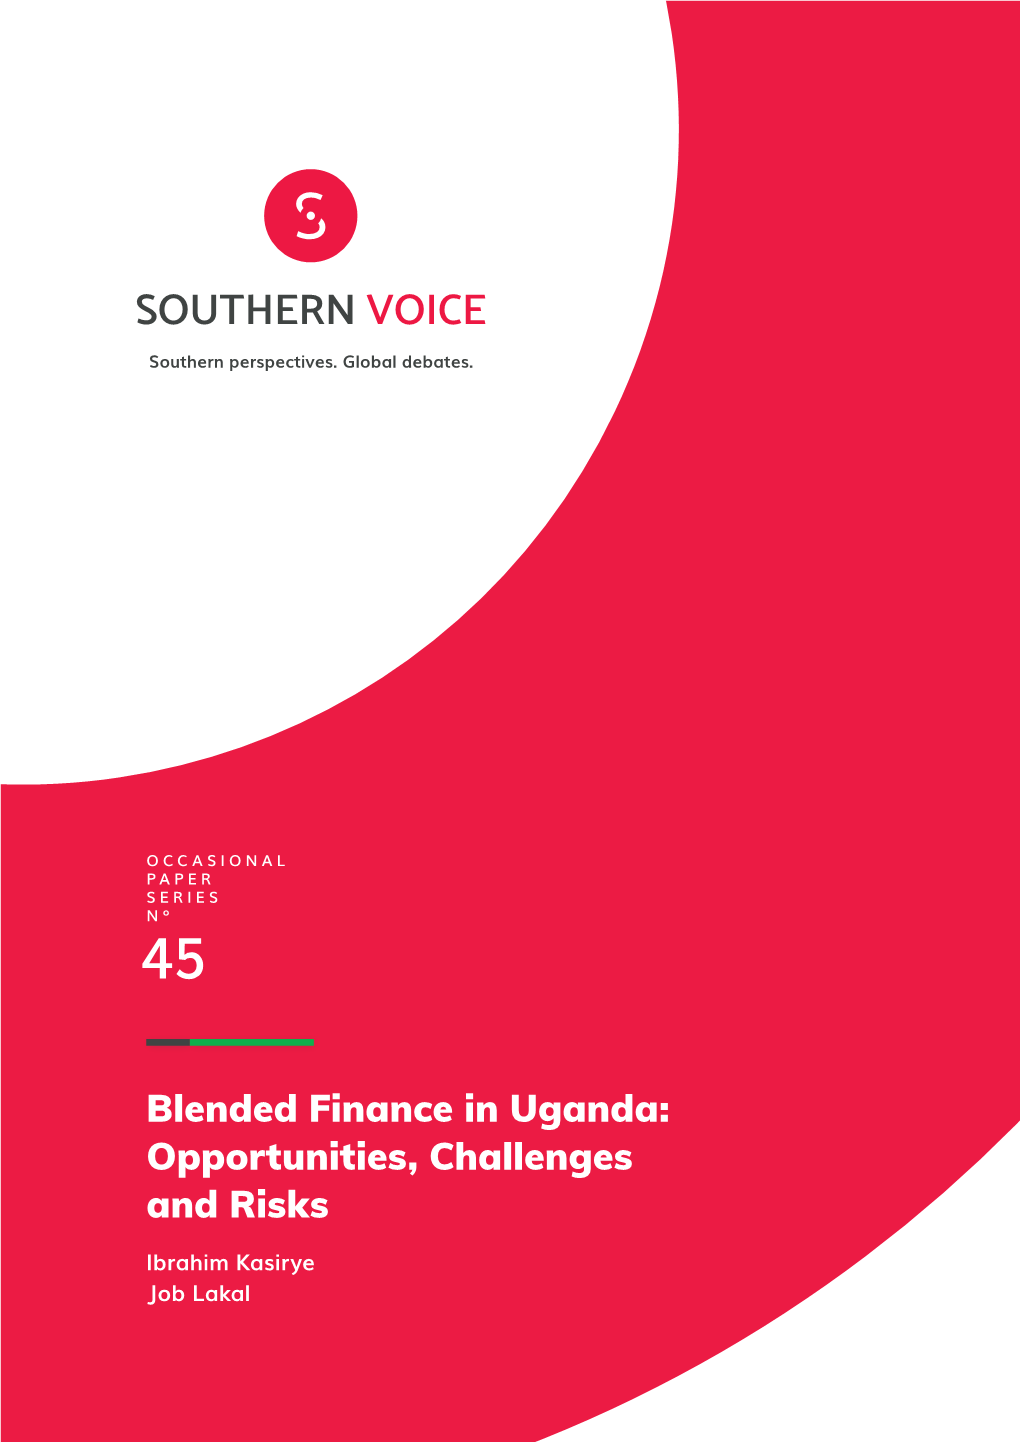 Blended Finance in Uganda: Opportunities, Challenges and Risks